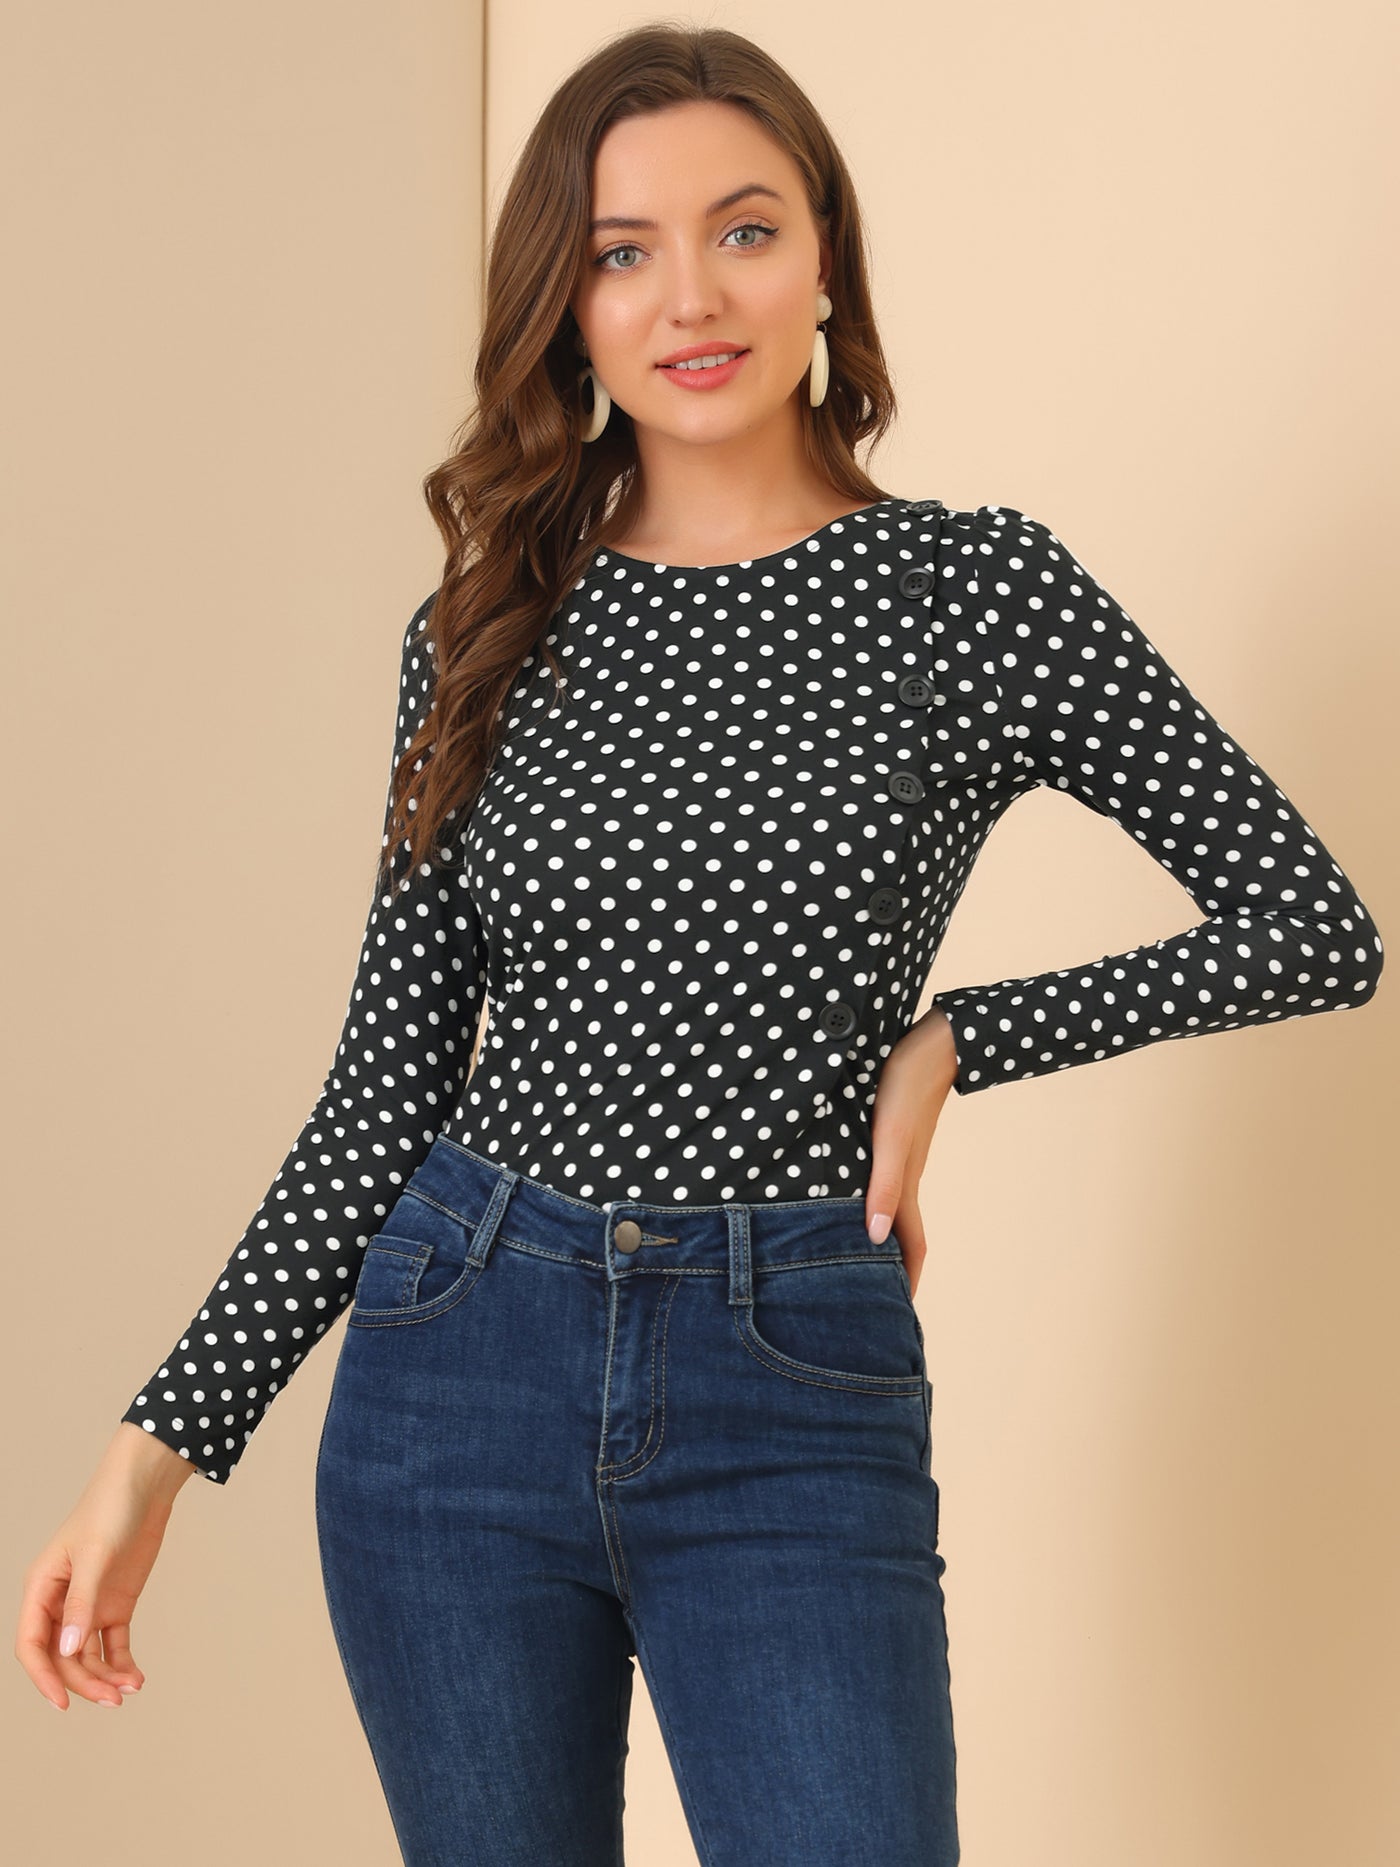 Allegra K Causal Polka Dots Blouse Round Neck Puff Long Sleeve Tops